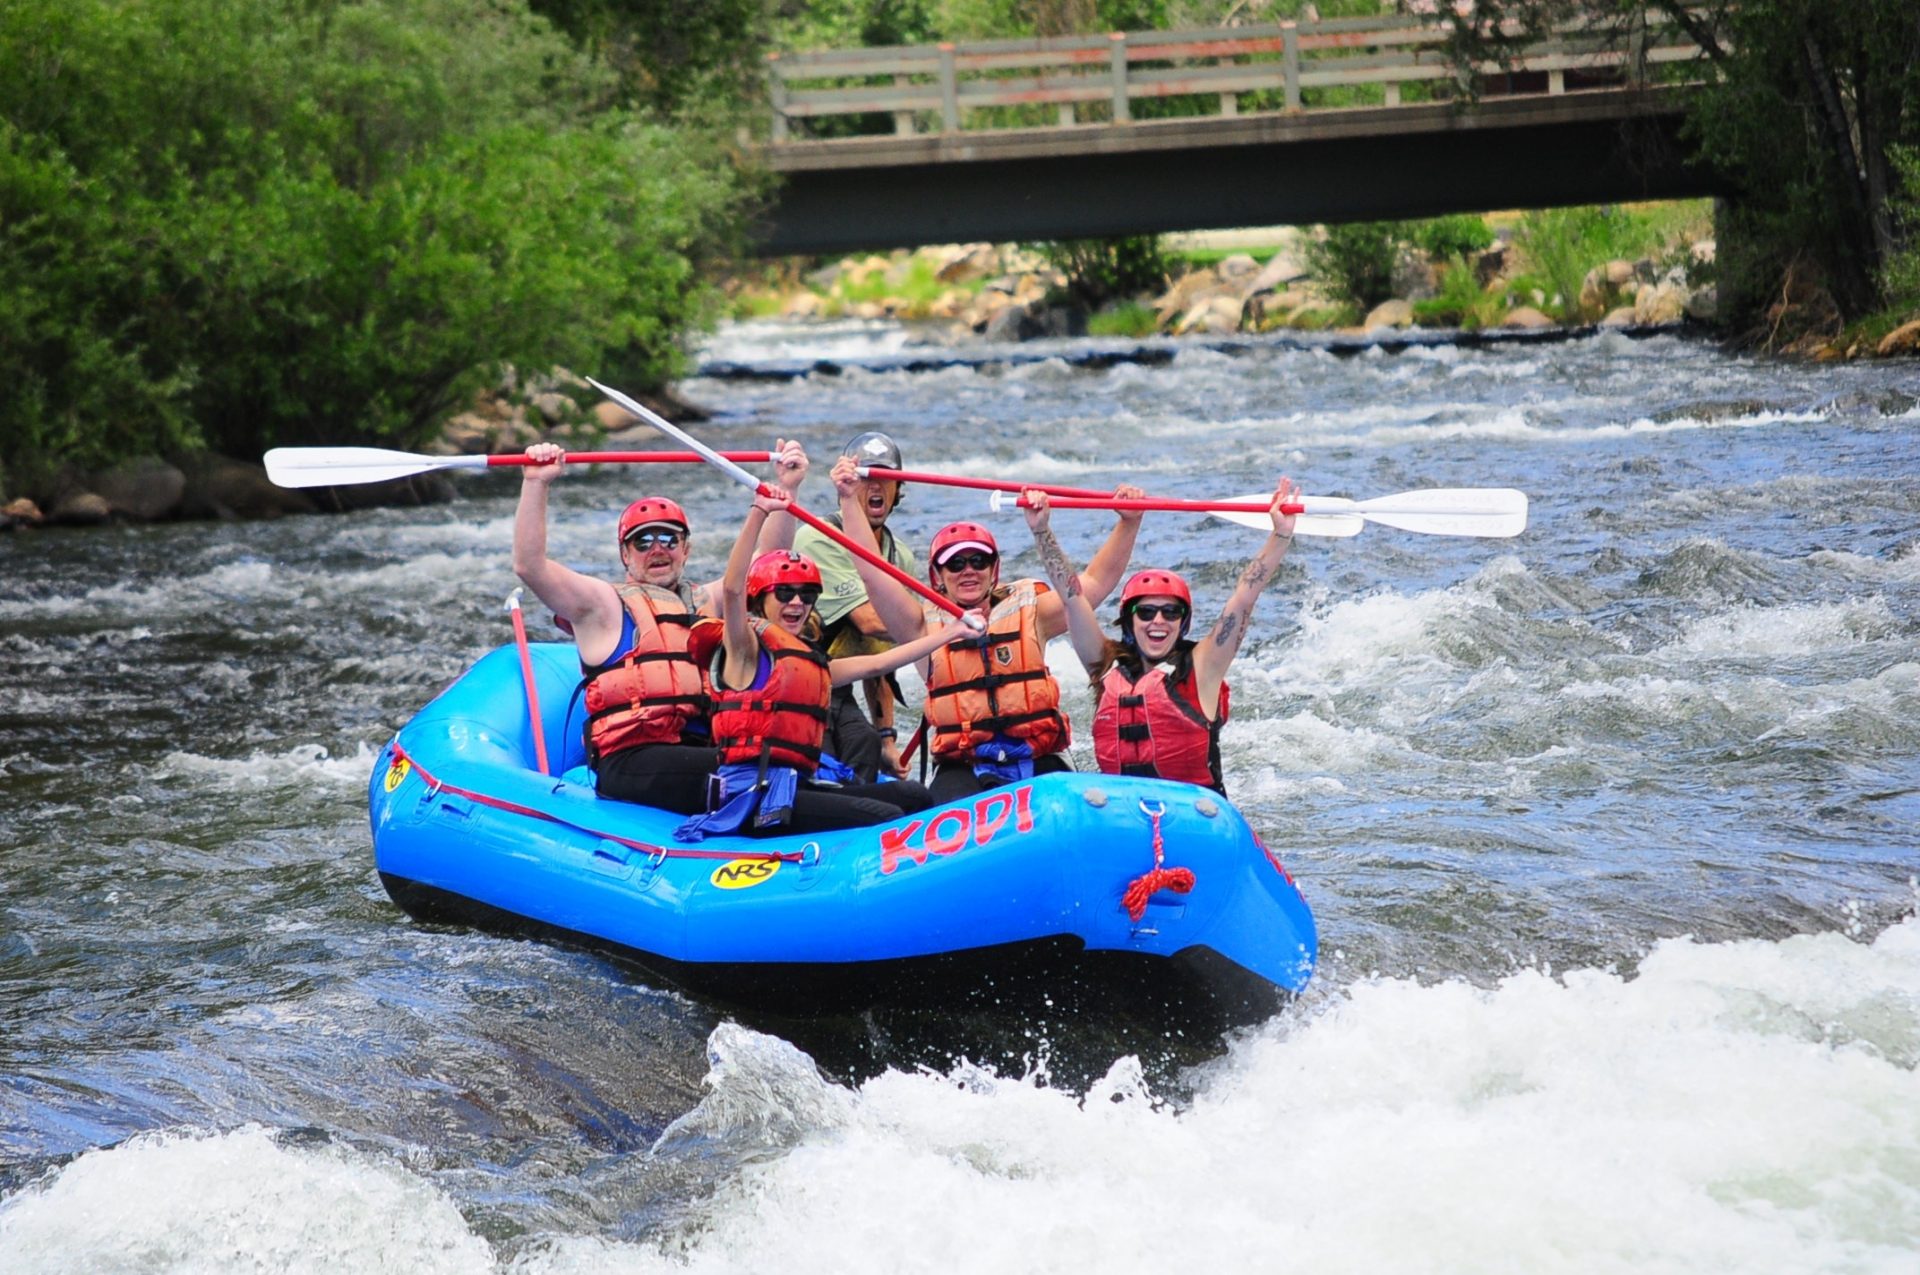 When you embark on Clear Creek rafting trips, prepare for a challenging and exciting experience